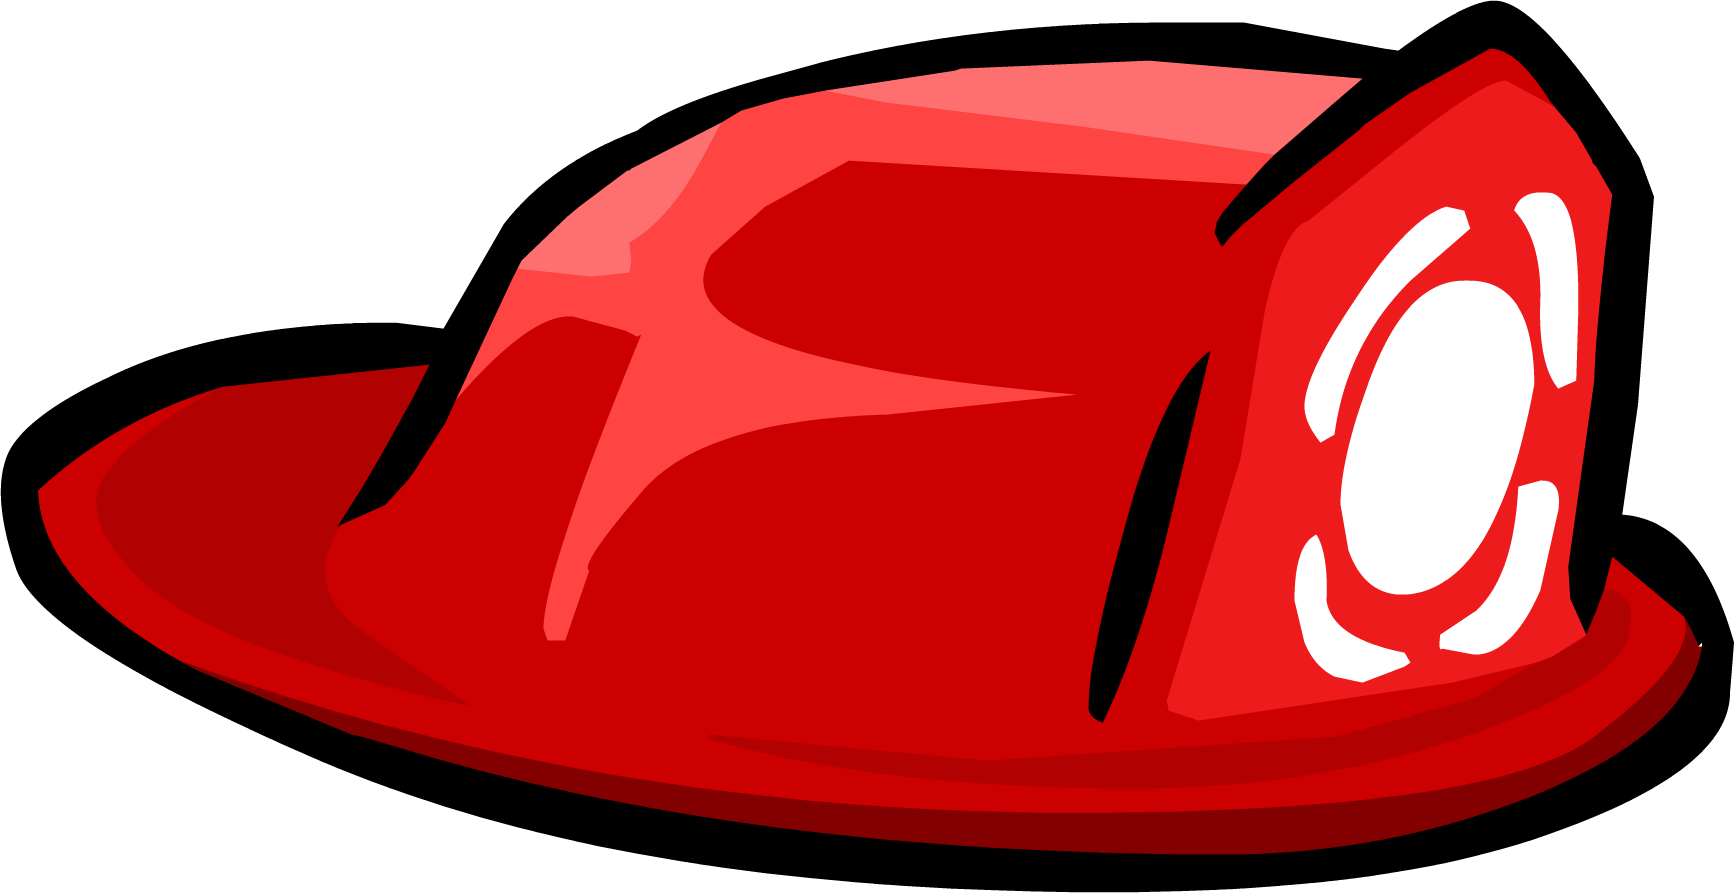 firefighter hat clipart - photo #6